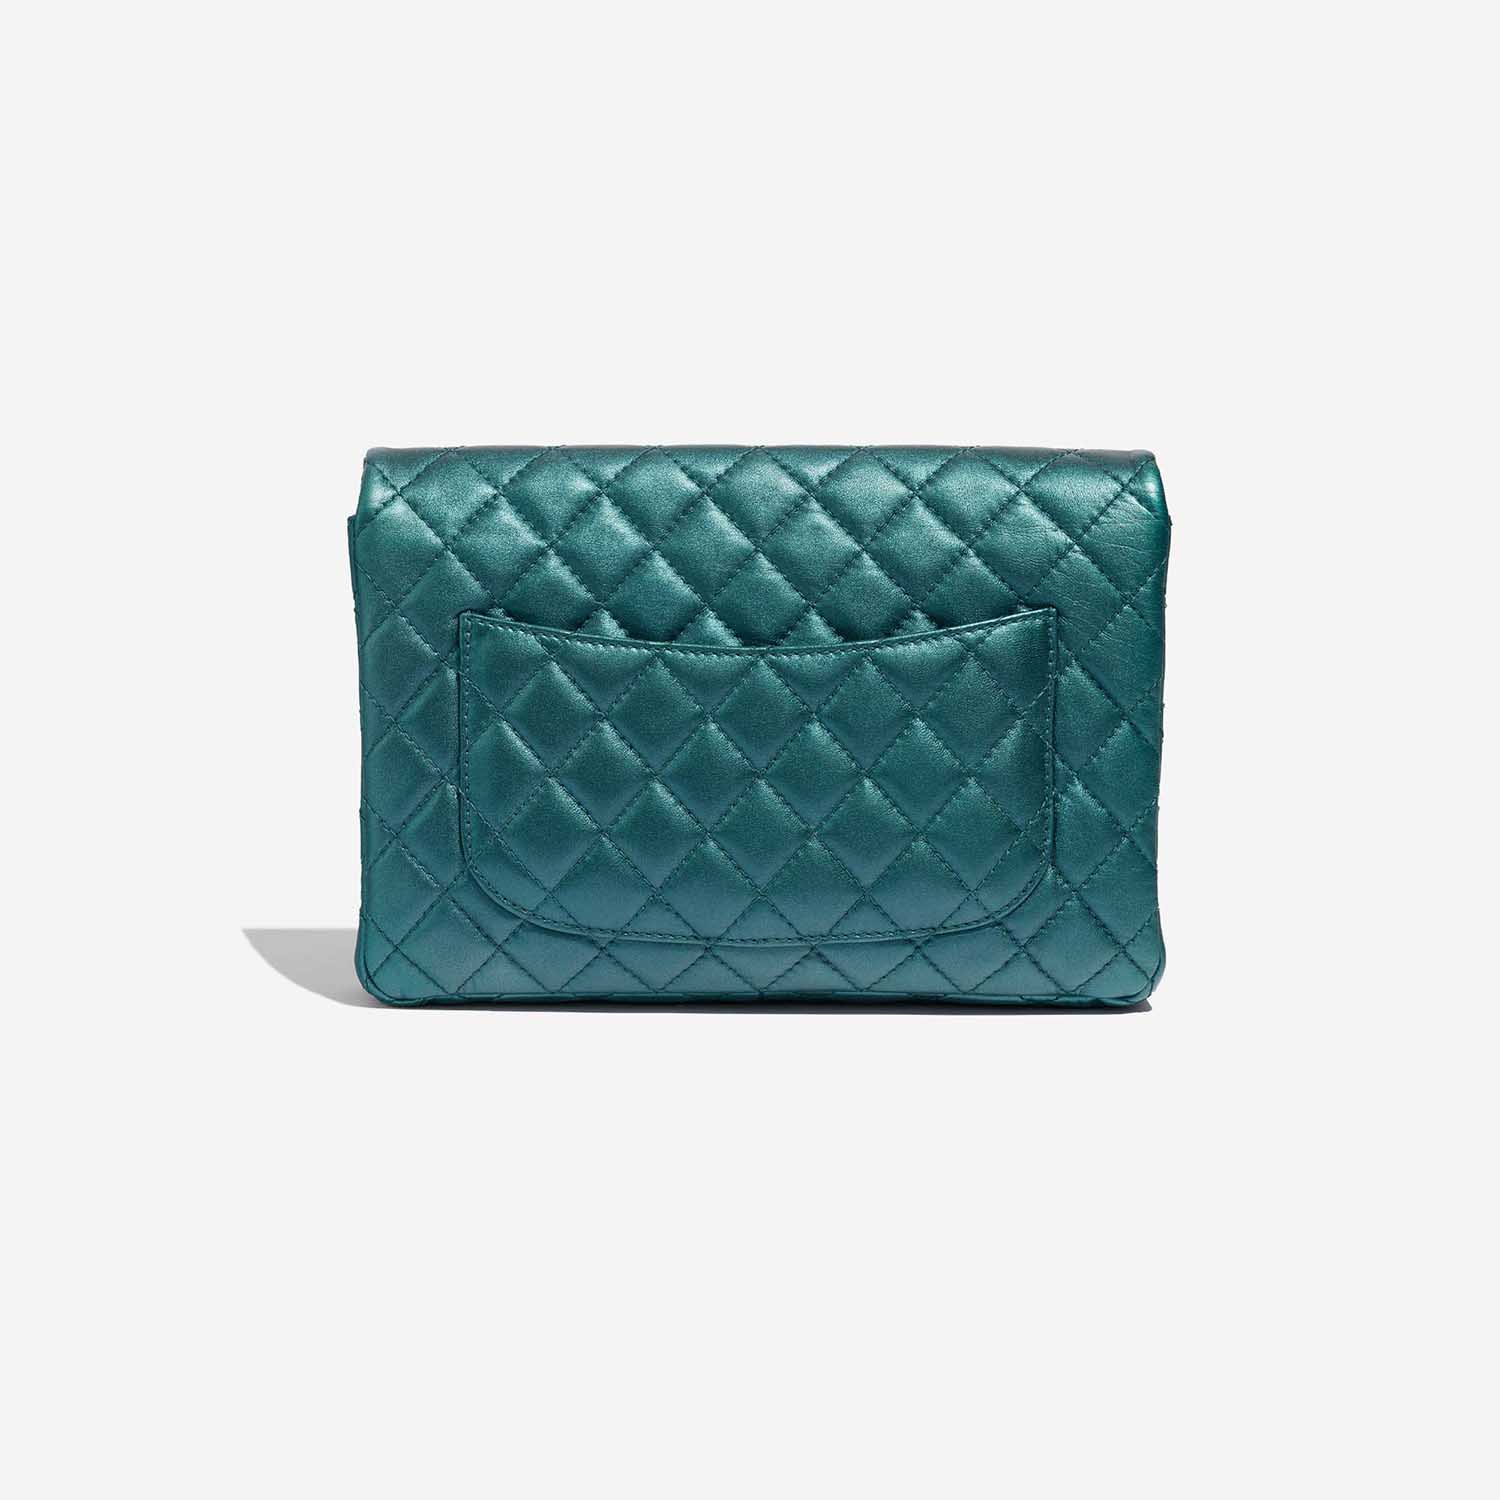 Pre-owned Chanel bag 2.55 Reissue 226 Lamb Metallic Blue Blue Back | Sell your designer bag on Saclab.com